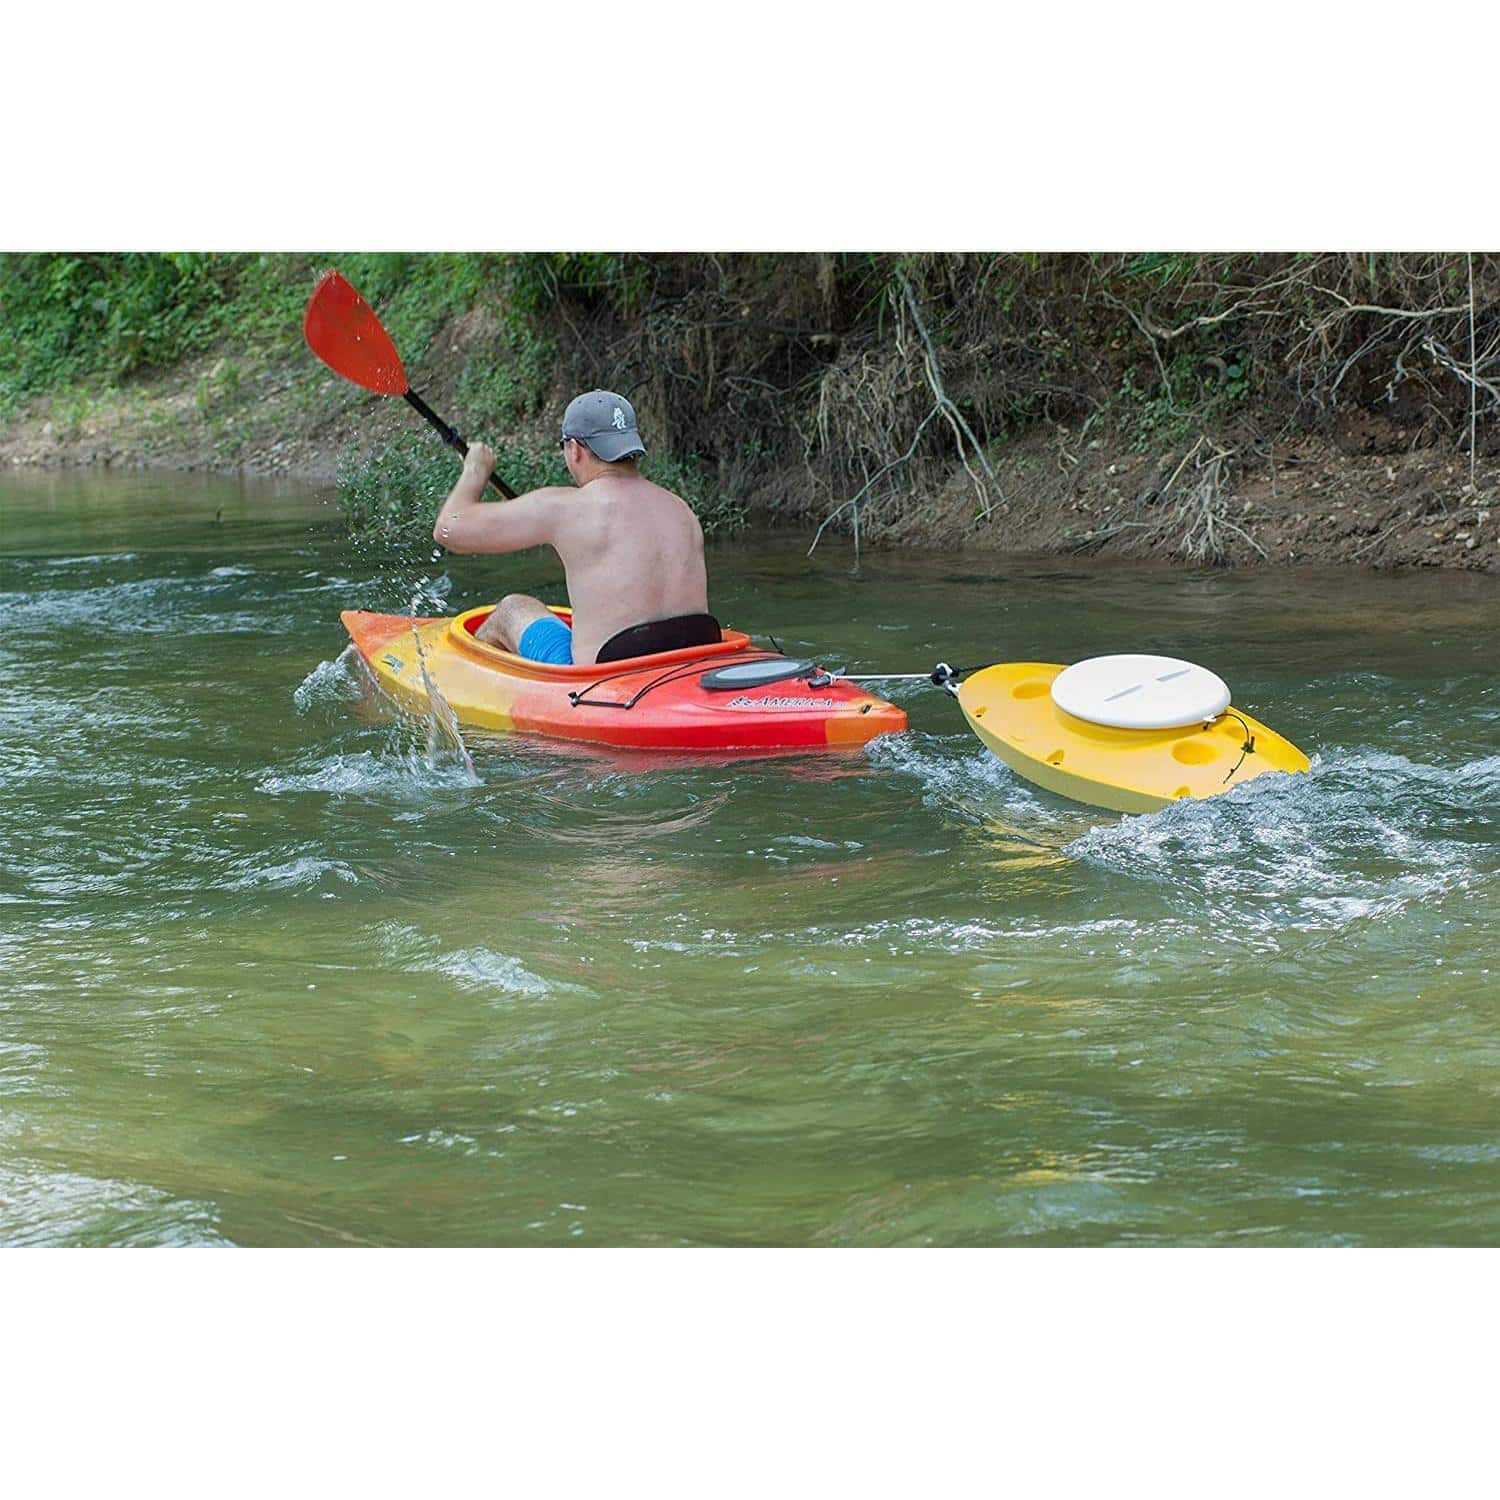 CreekKooler Floating Cooler, Tow on Rivers and Lakes with Canoe or Kayak, 30 Quart